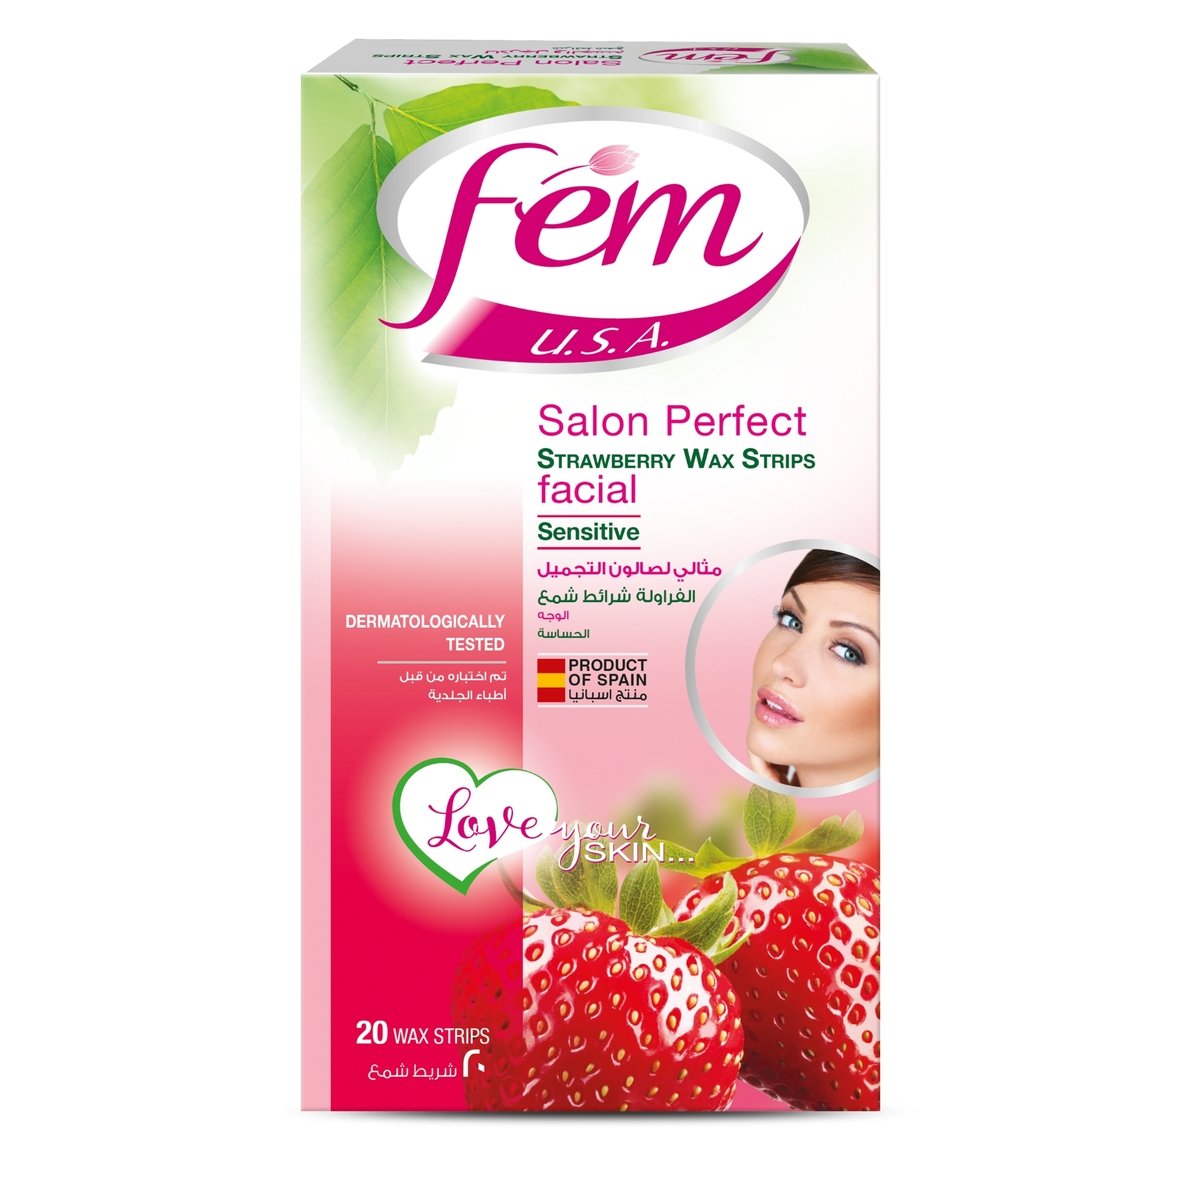 Fem USA Facial Wax Strips Enriched With Strawberry For Sensitive Skin 20 pcs